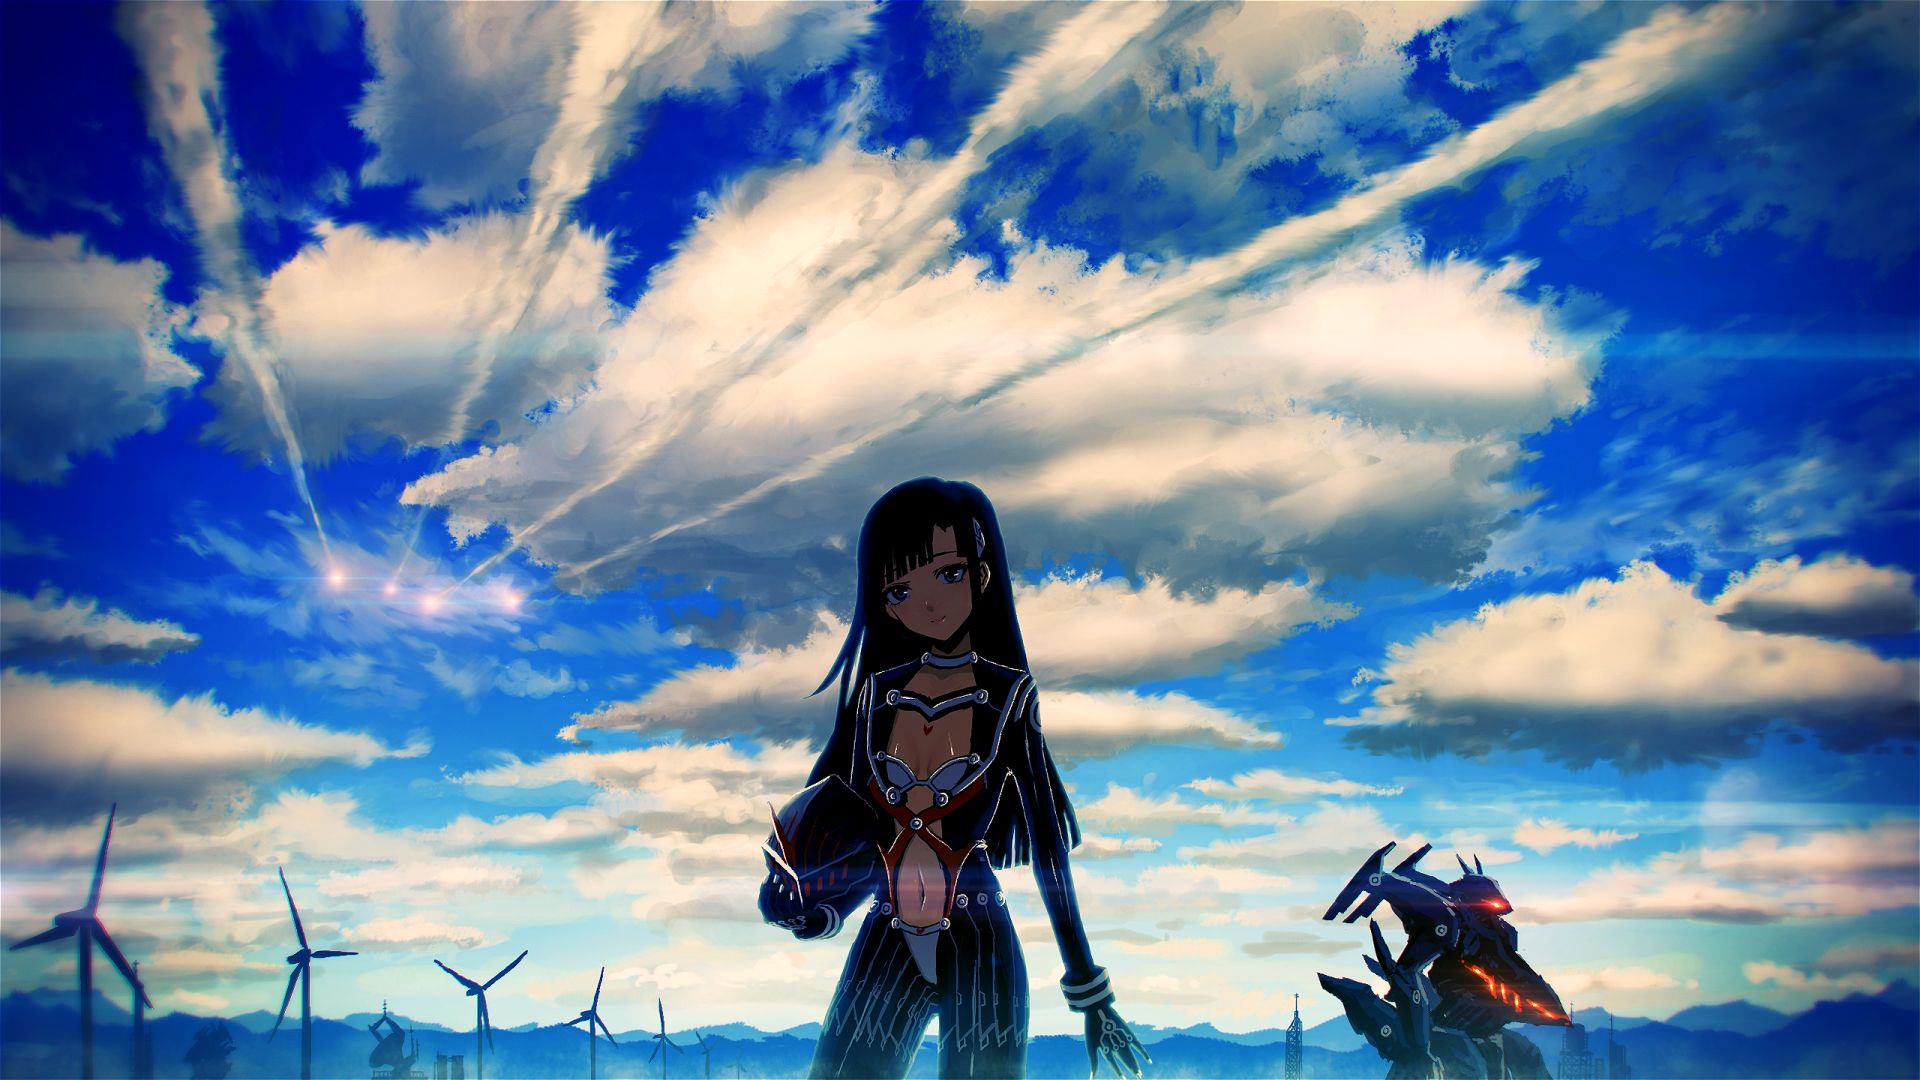 Wallpaper, sunlight, sunset, anime girls, reflection, sky, clouds, blue, evening, mech, original characters, cloud, computer wallpaper, atmosphere of earth, meteorological phenomenon 1920x1080